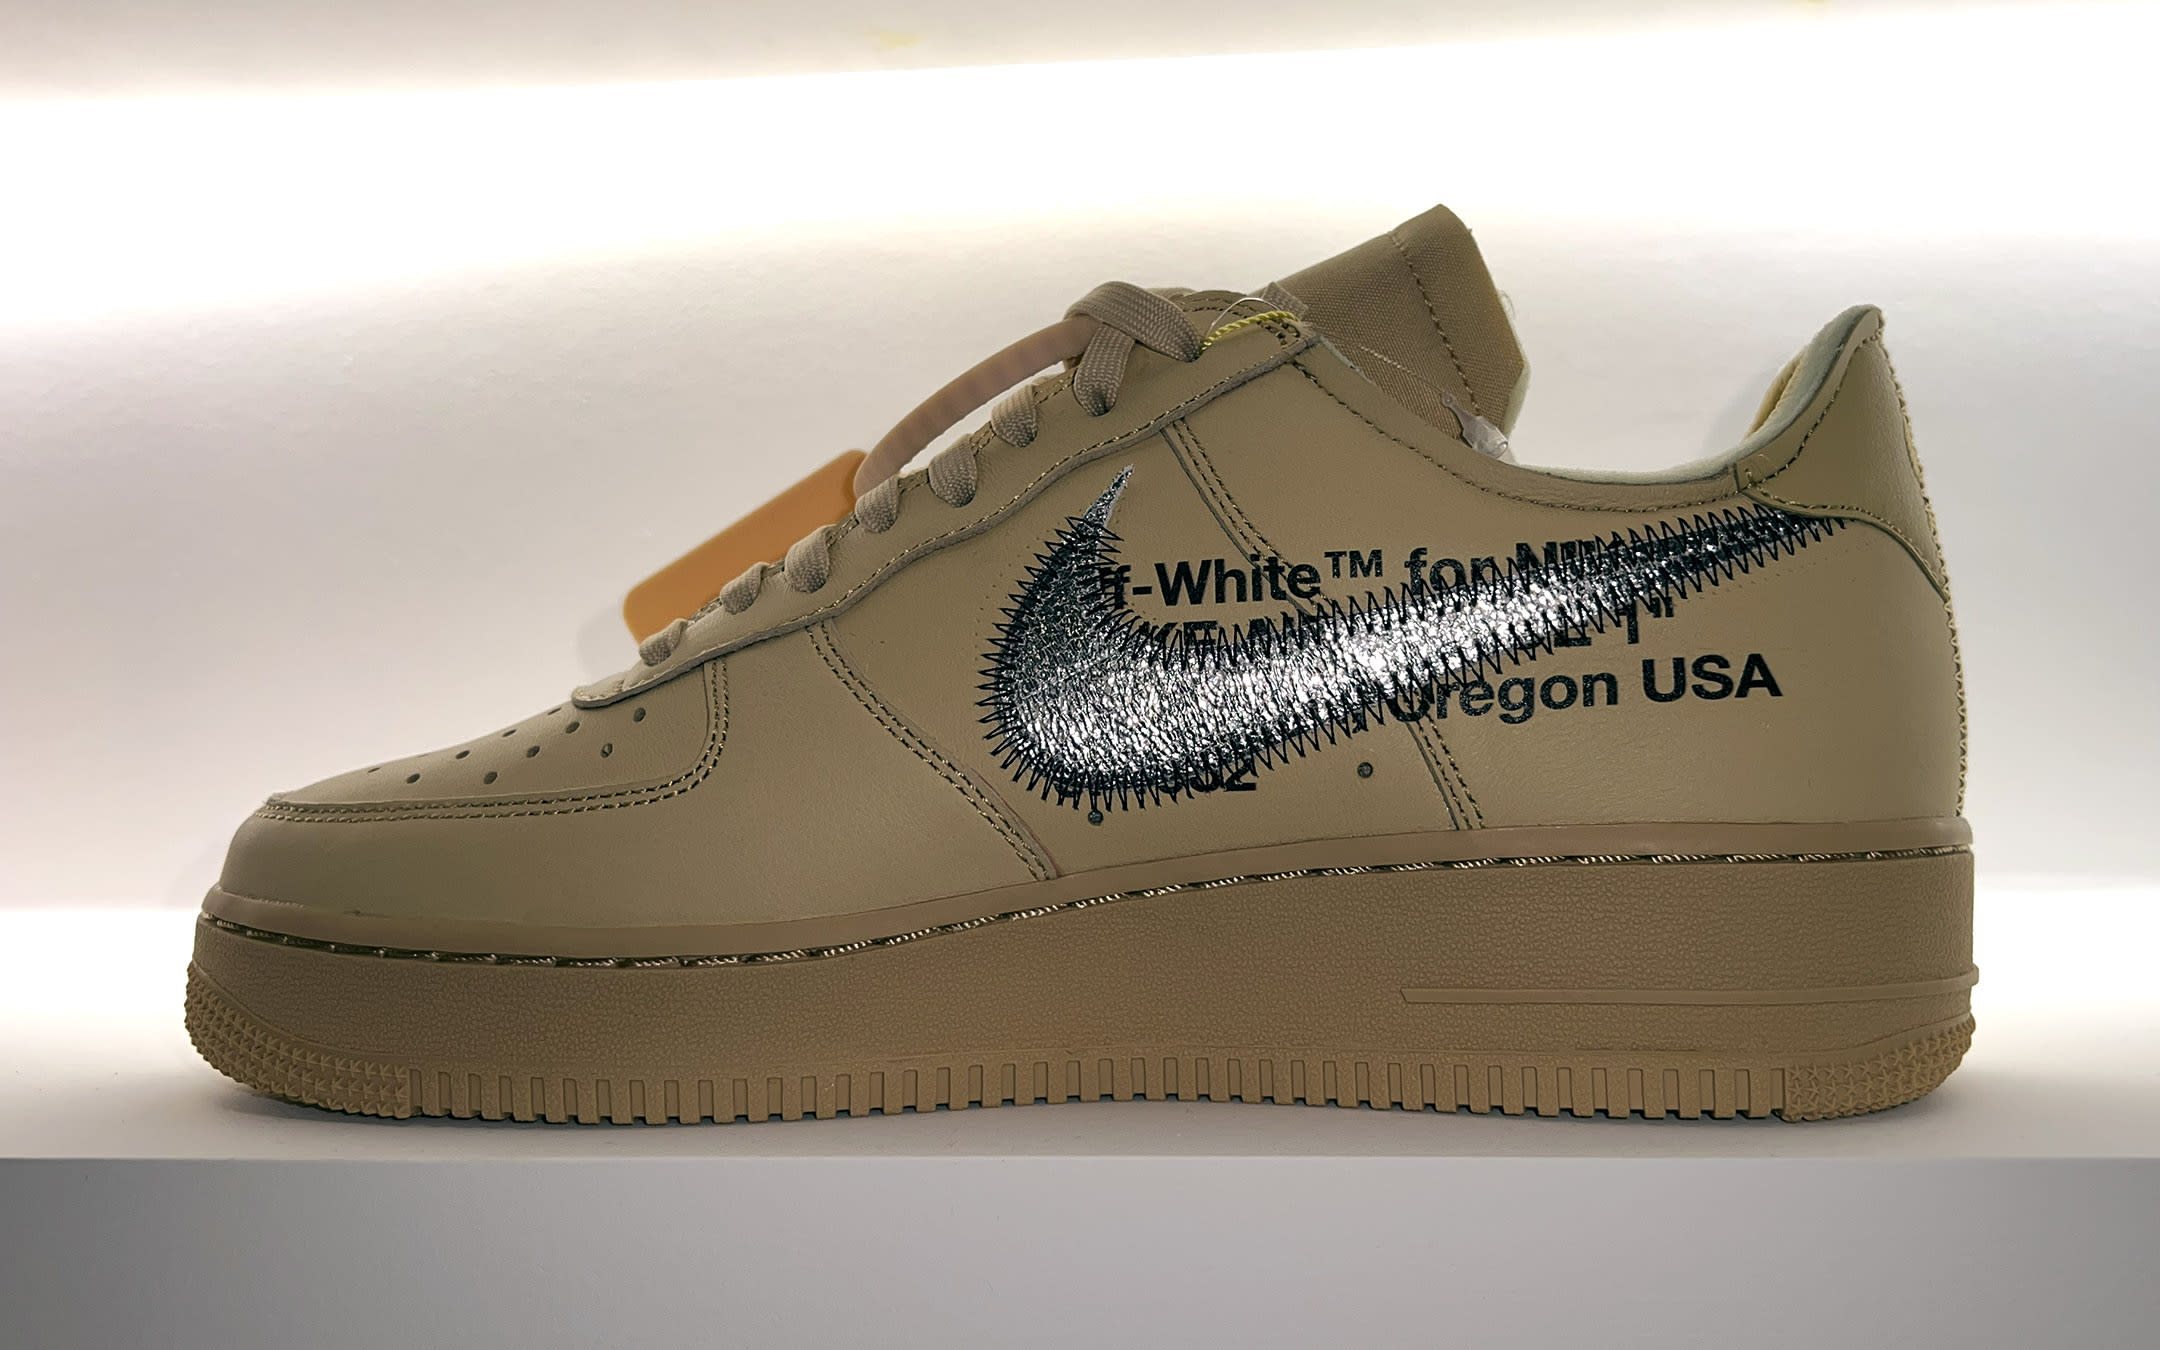 Off-White AF1 MoMA! What are your thoughts on these! #fyp #sneakers